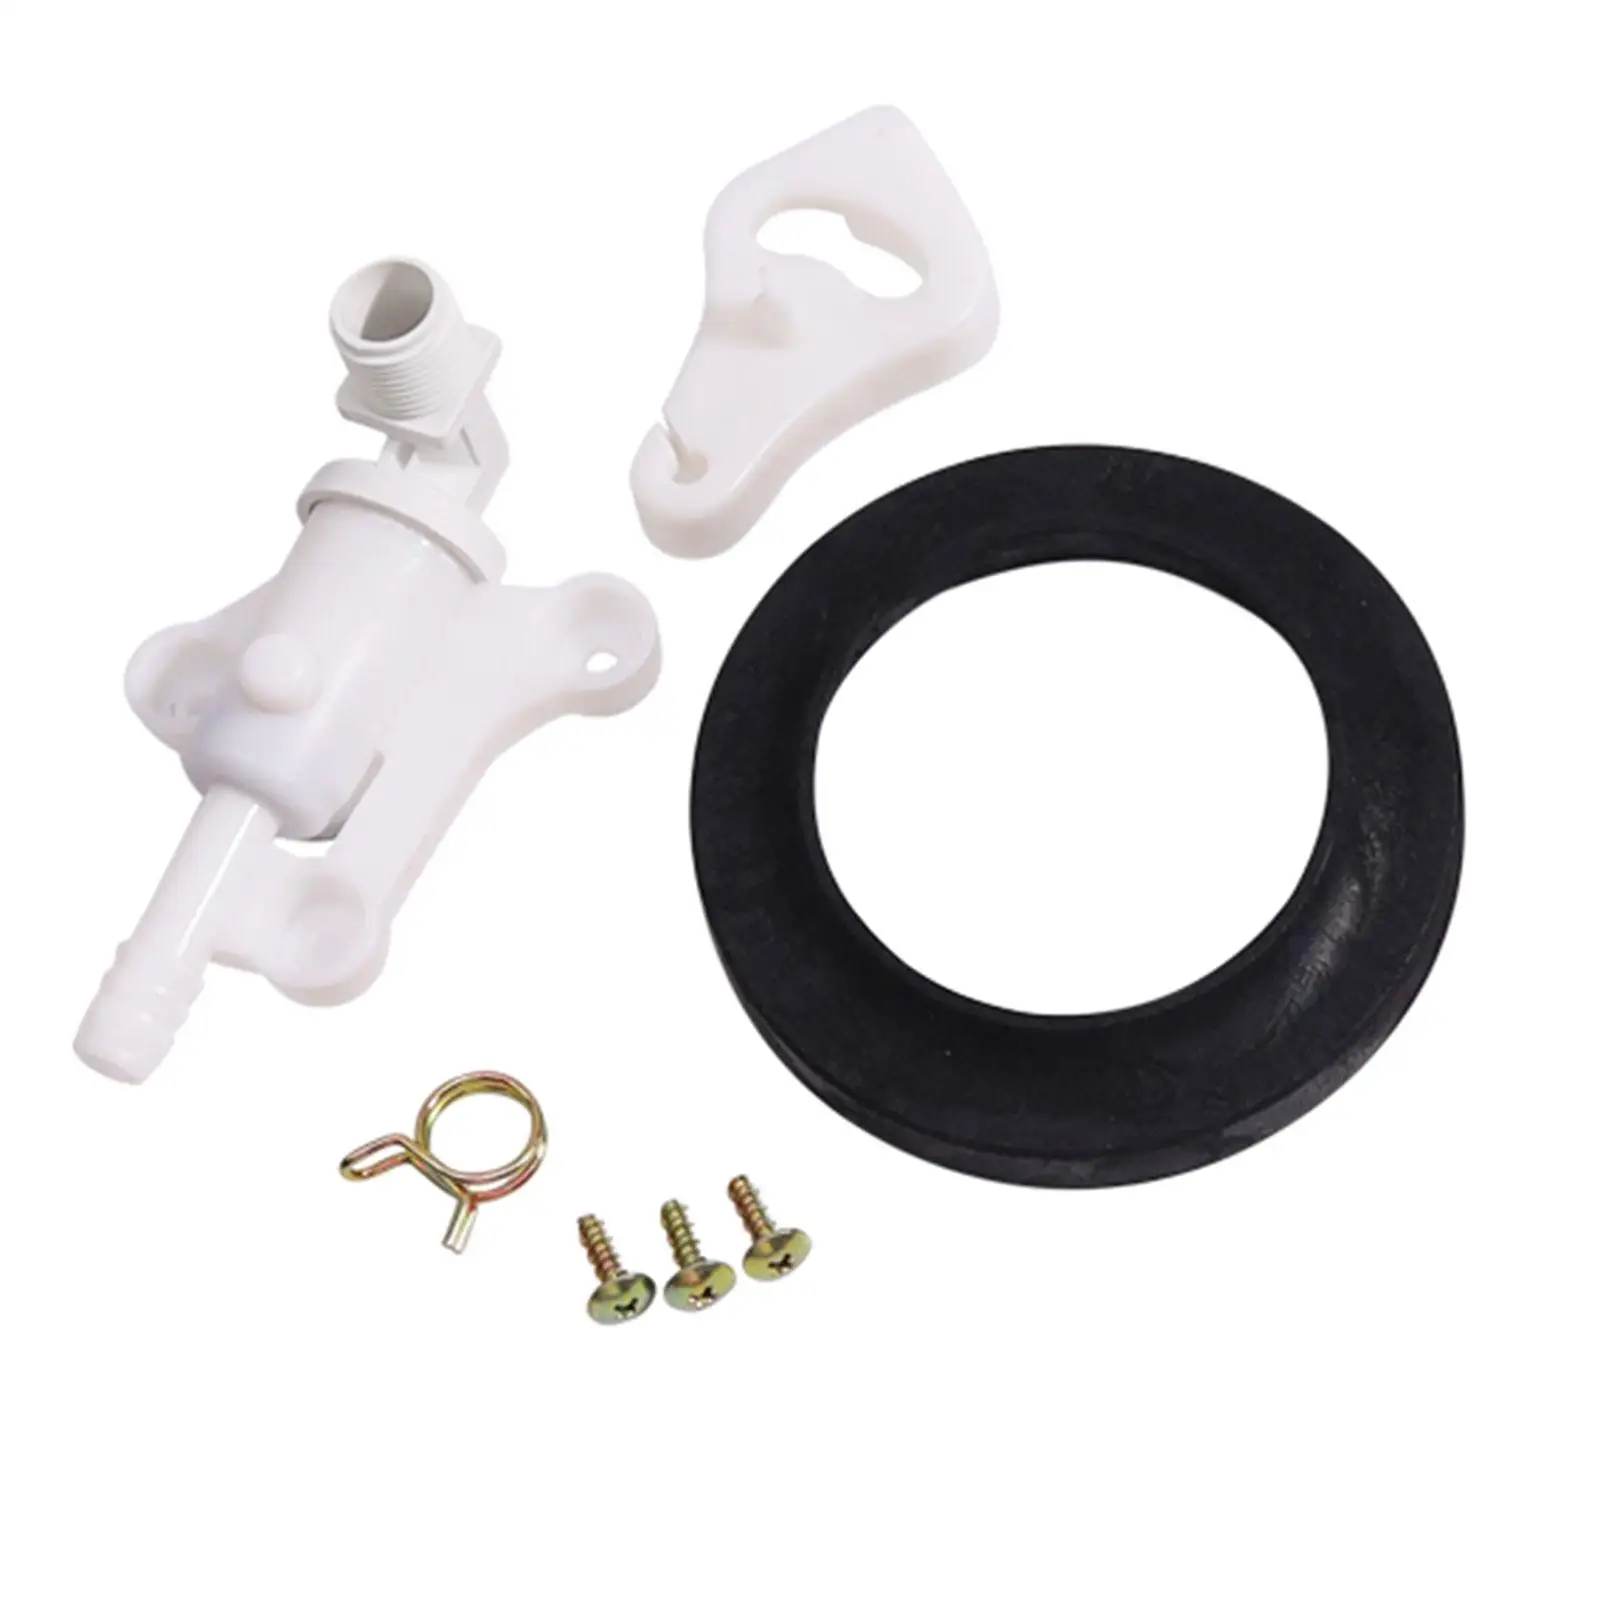 34100 Water Valve Convenient Practical Accessory for Style Plus